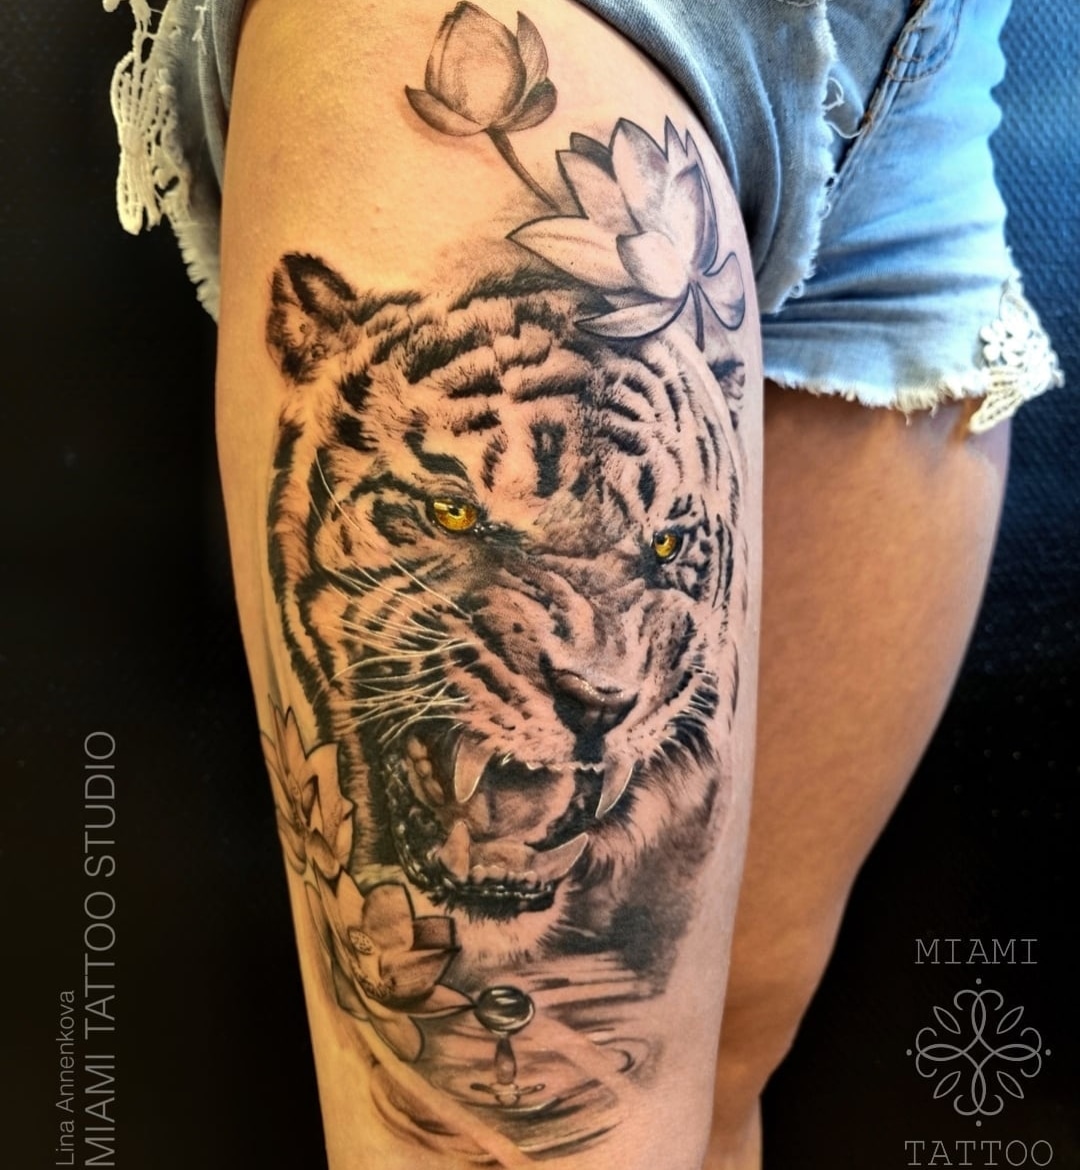 An artist with a higher art education and a winner of European body art conventions, Lina Anenkova#tattoos #tattooed #tattooartist #tattooart #winner #realismtattoo #tattooconvention #east_hastings_tattoo #tattooshopnearme #hastingscommunity #easthastings